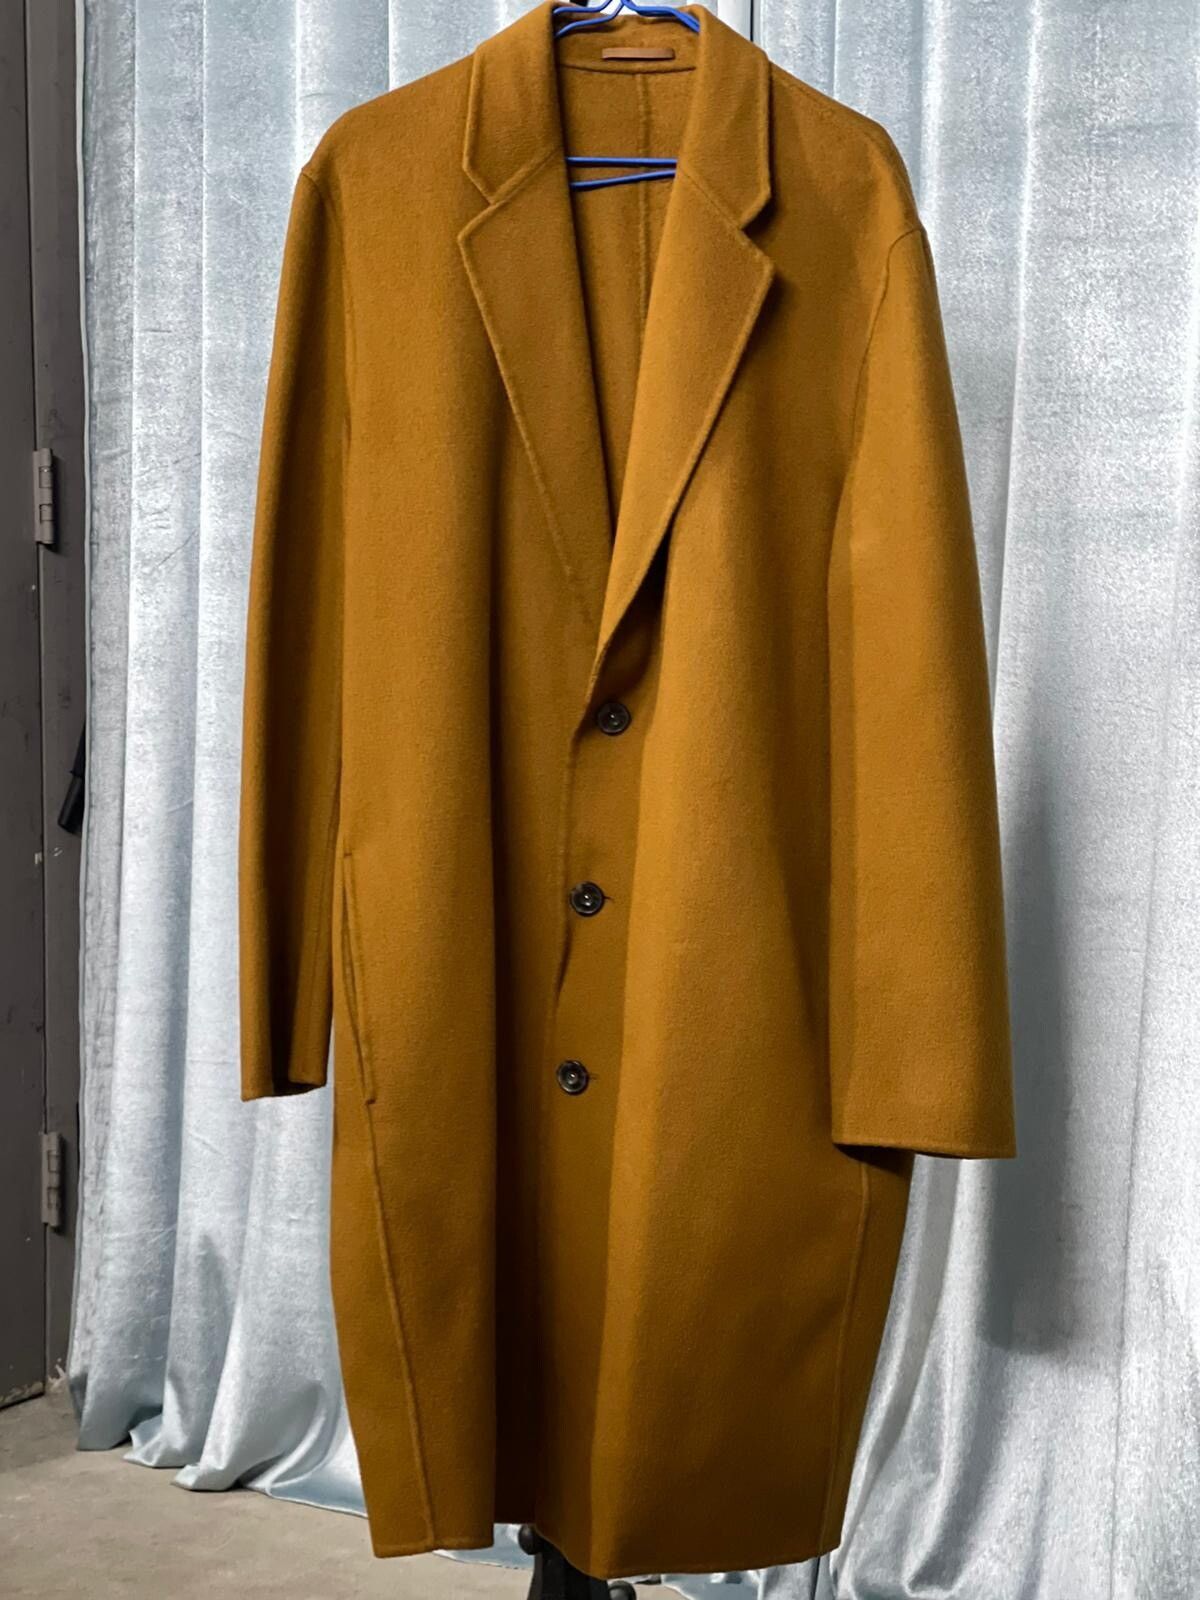 Acne Studios Charles double face cashmere coat | Grailed